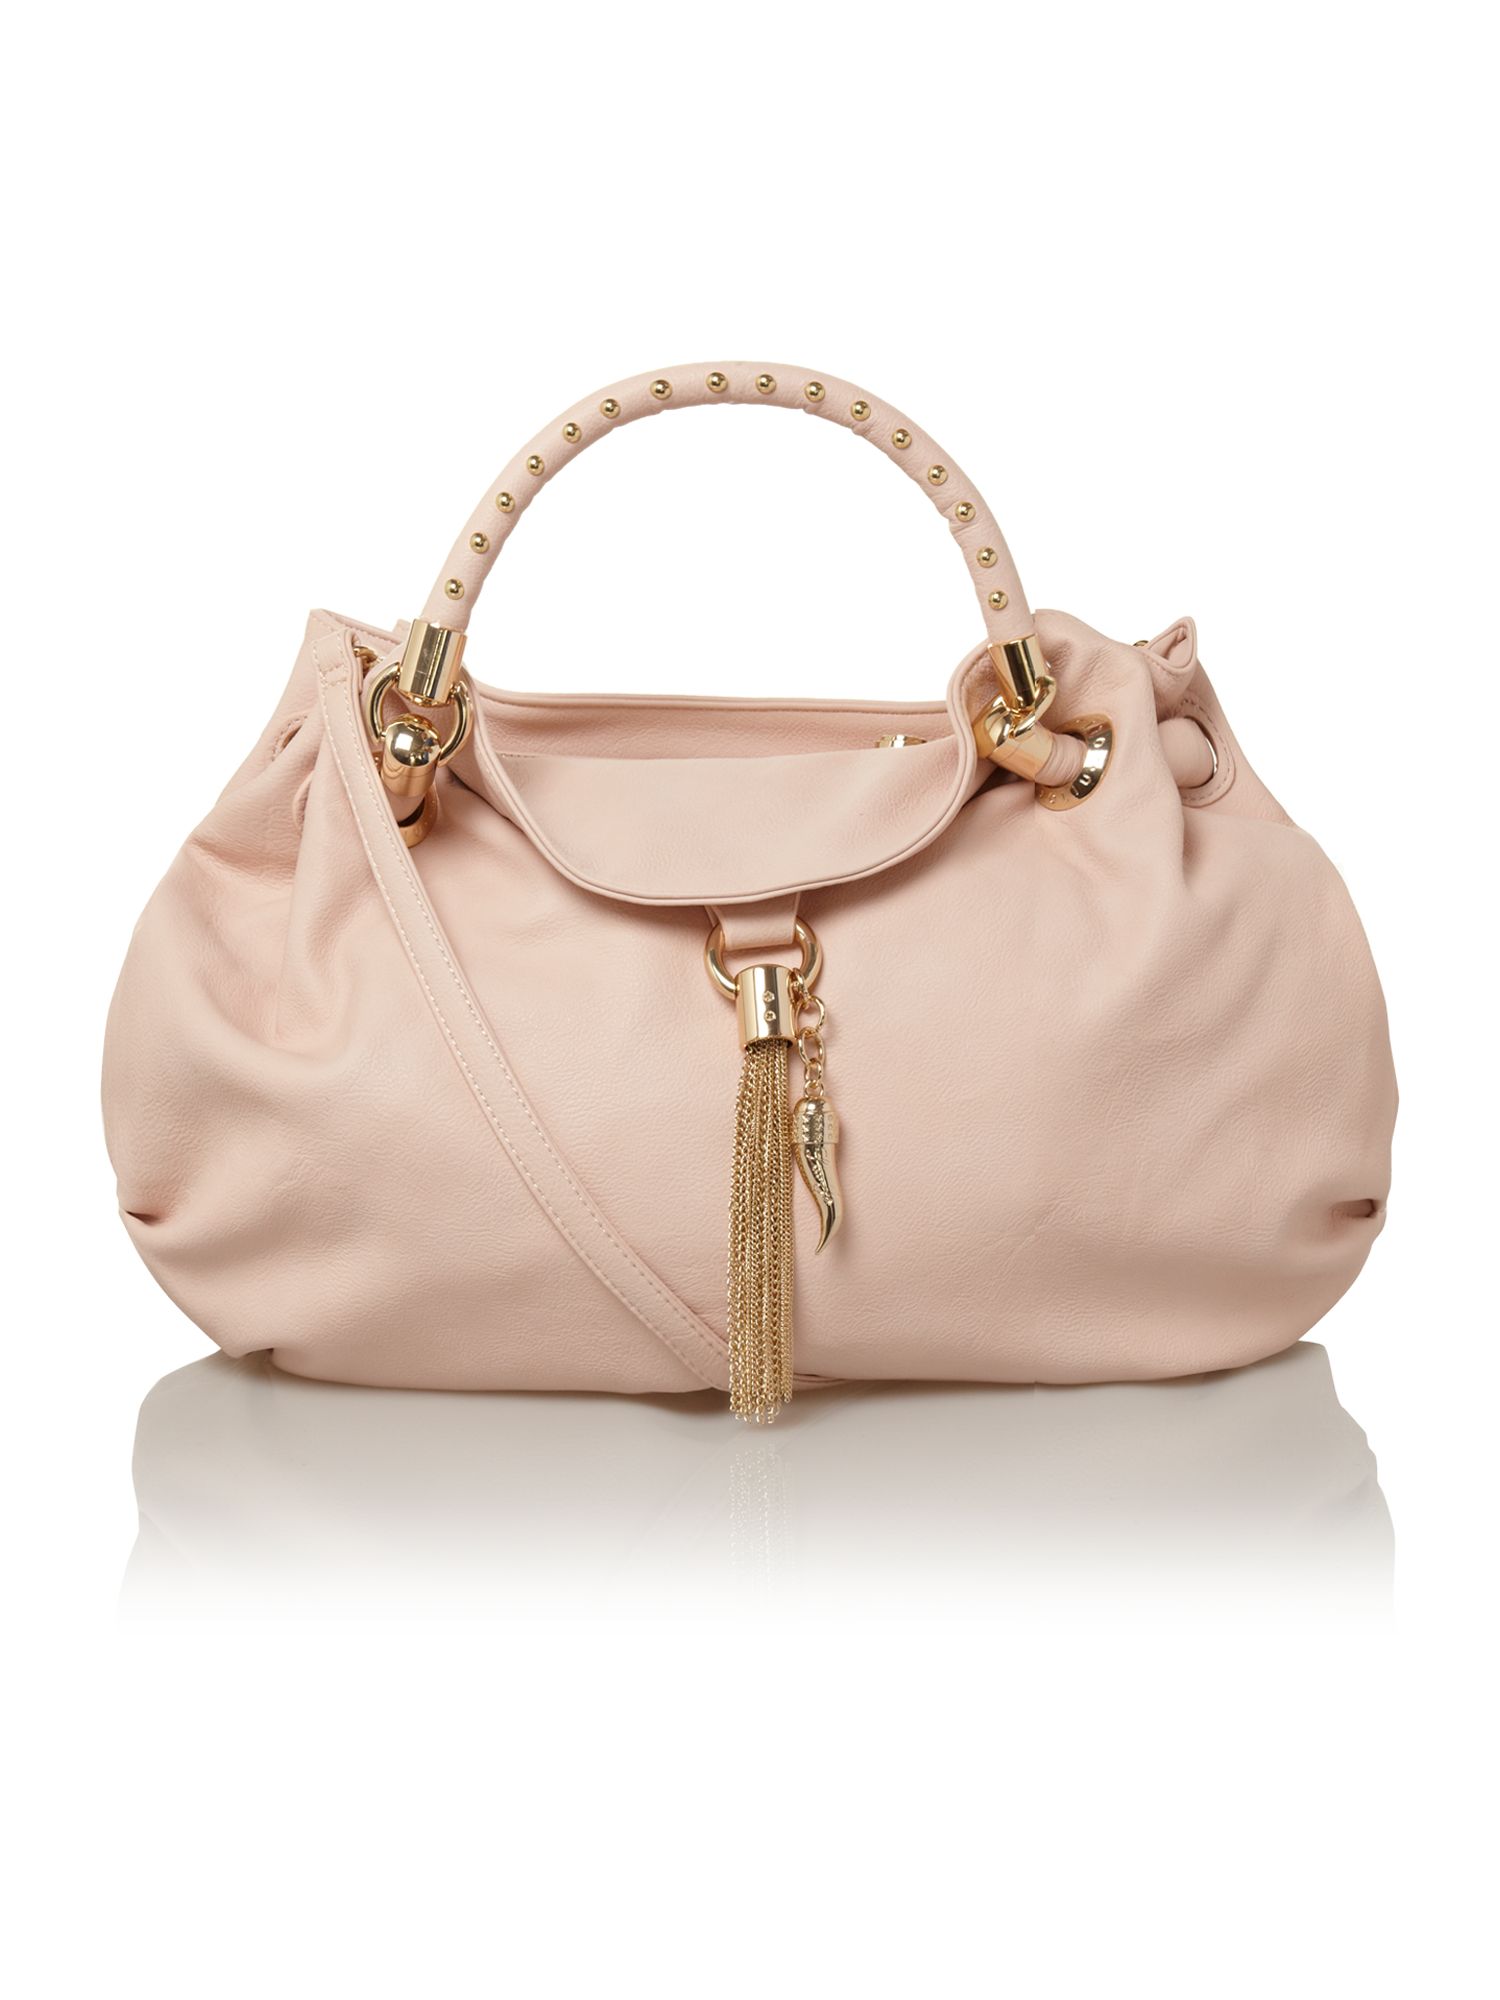 Liu Jo New Good Luck Large Tote Bag with Tassels in Pink | Lyst